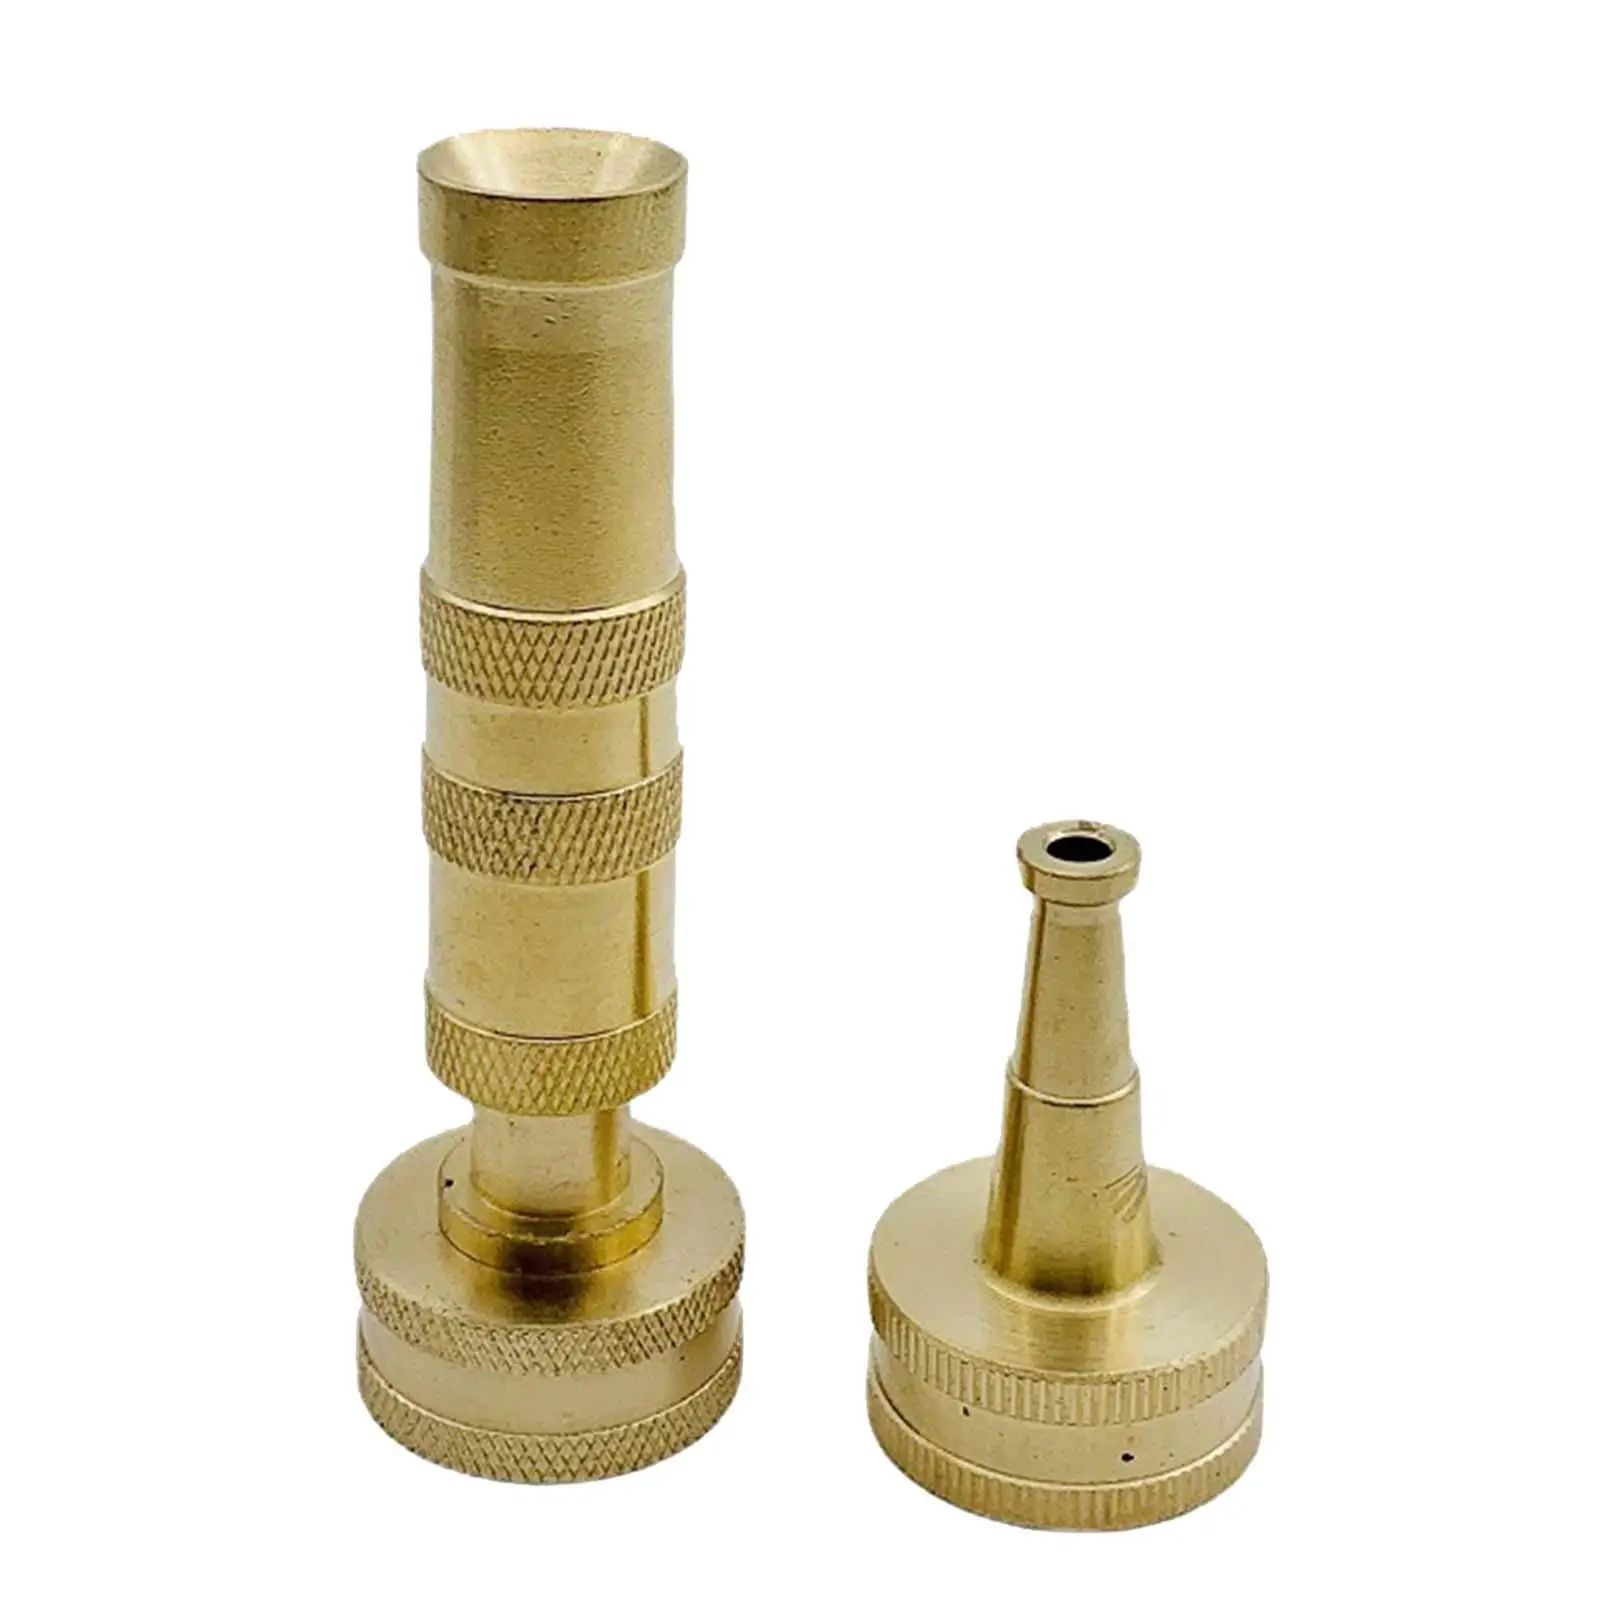 Solid Brass Hose Nozzle Garden Hose Nozzle for Watering House Yard